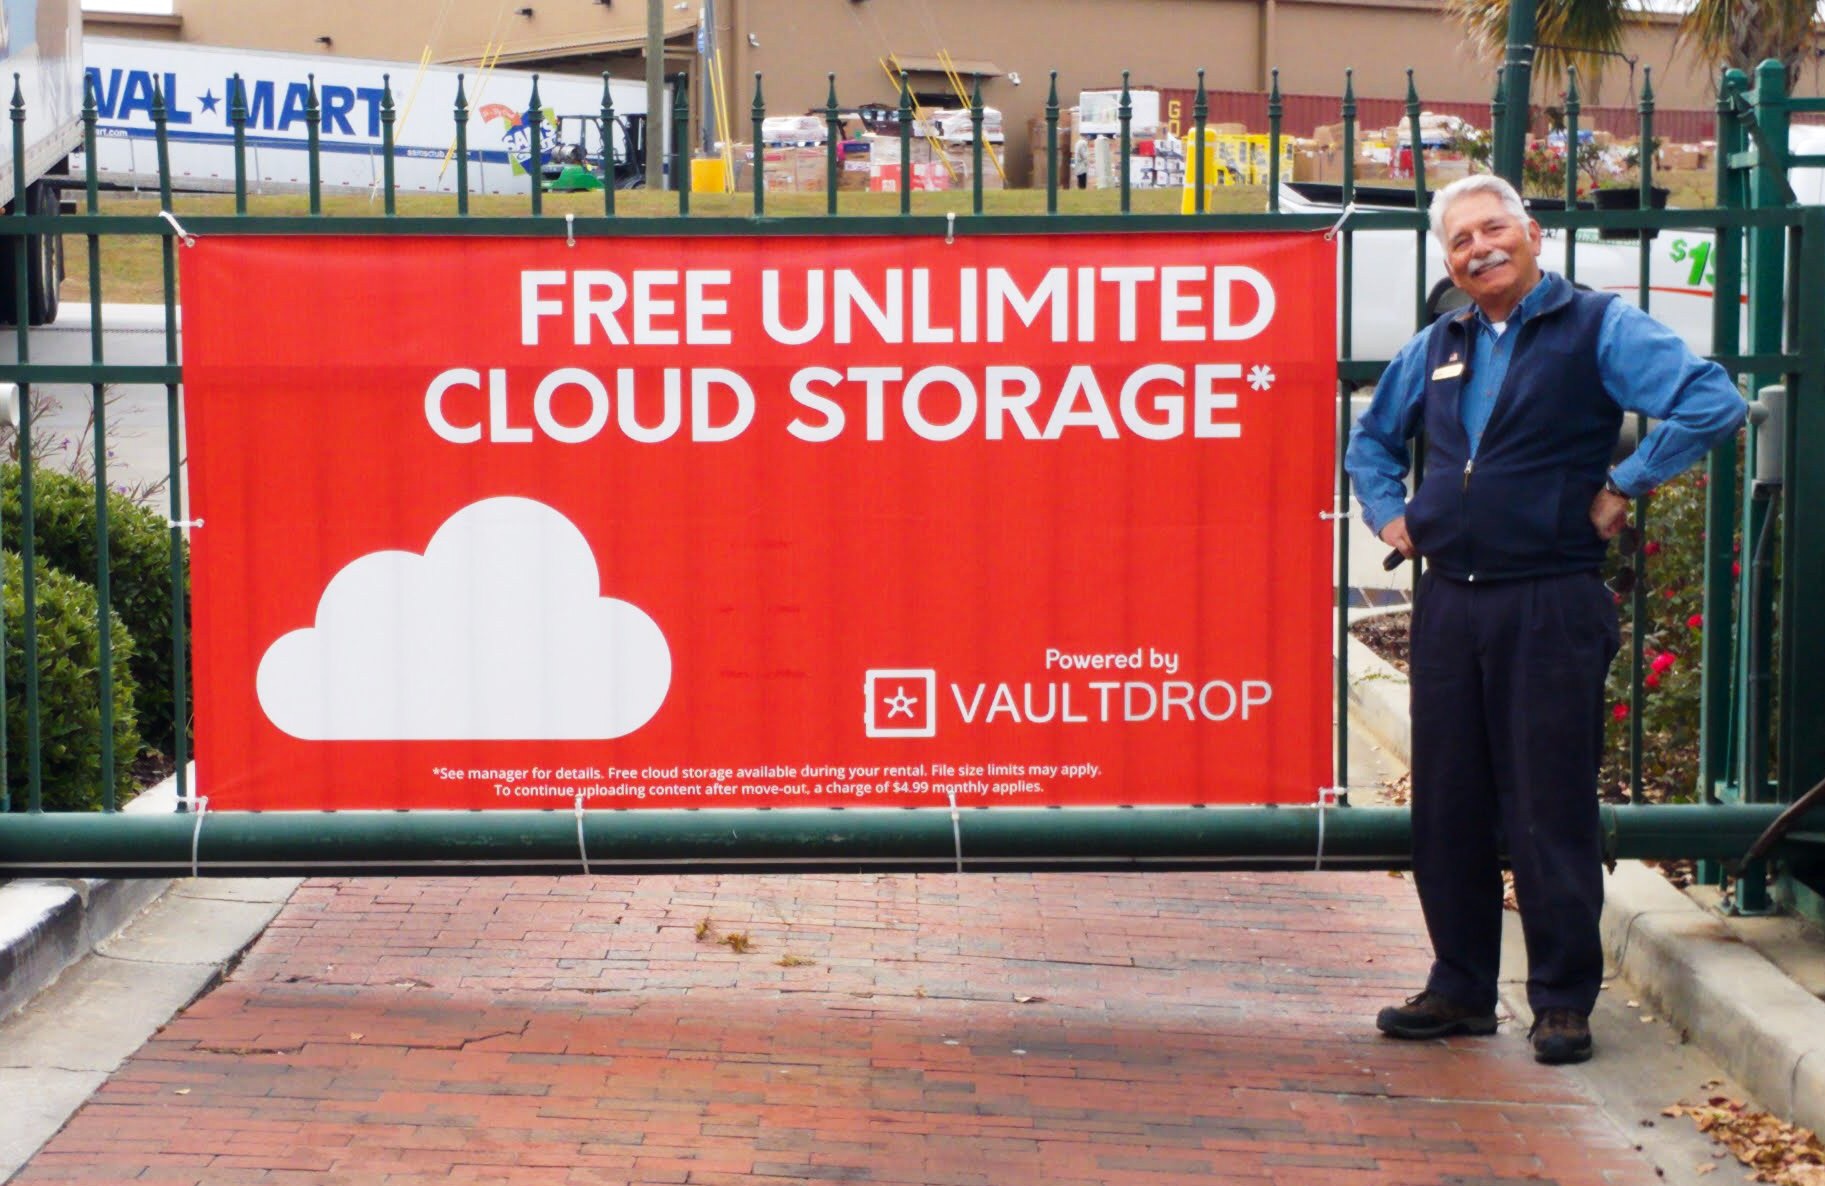 Devon Self Storage And Vaultdrop Llc Announce Free Unlimited Cloud Storage As An Amenity For Self Storage Customers Vaultdrop Secure Online File Sharing And Storage